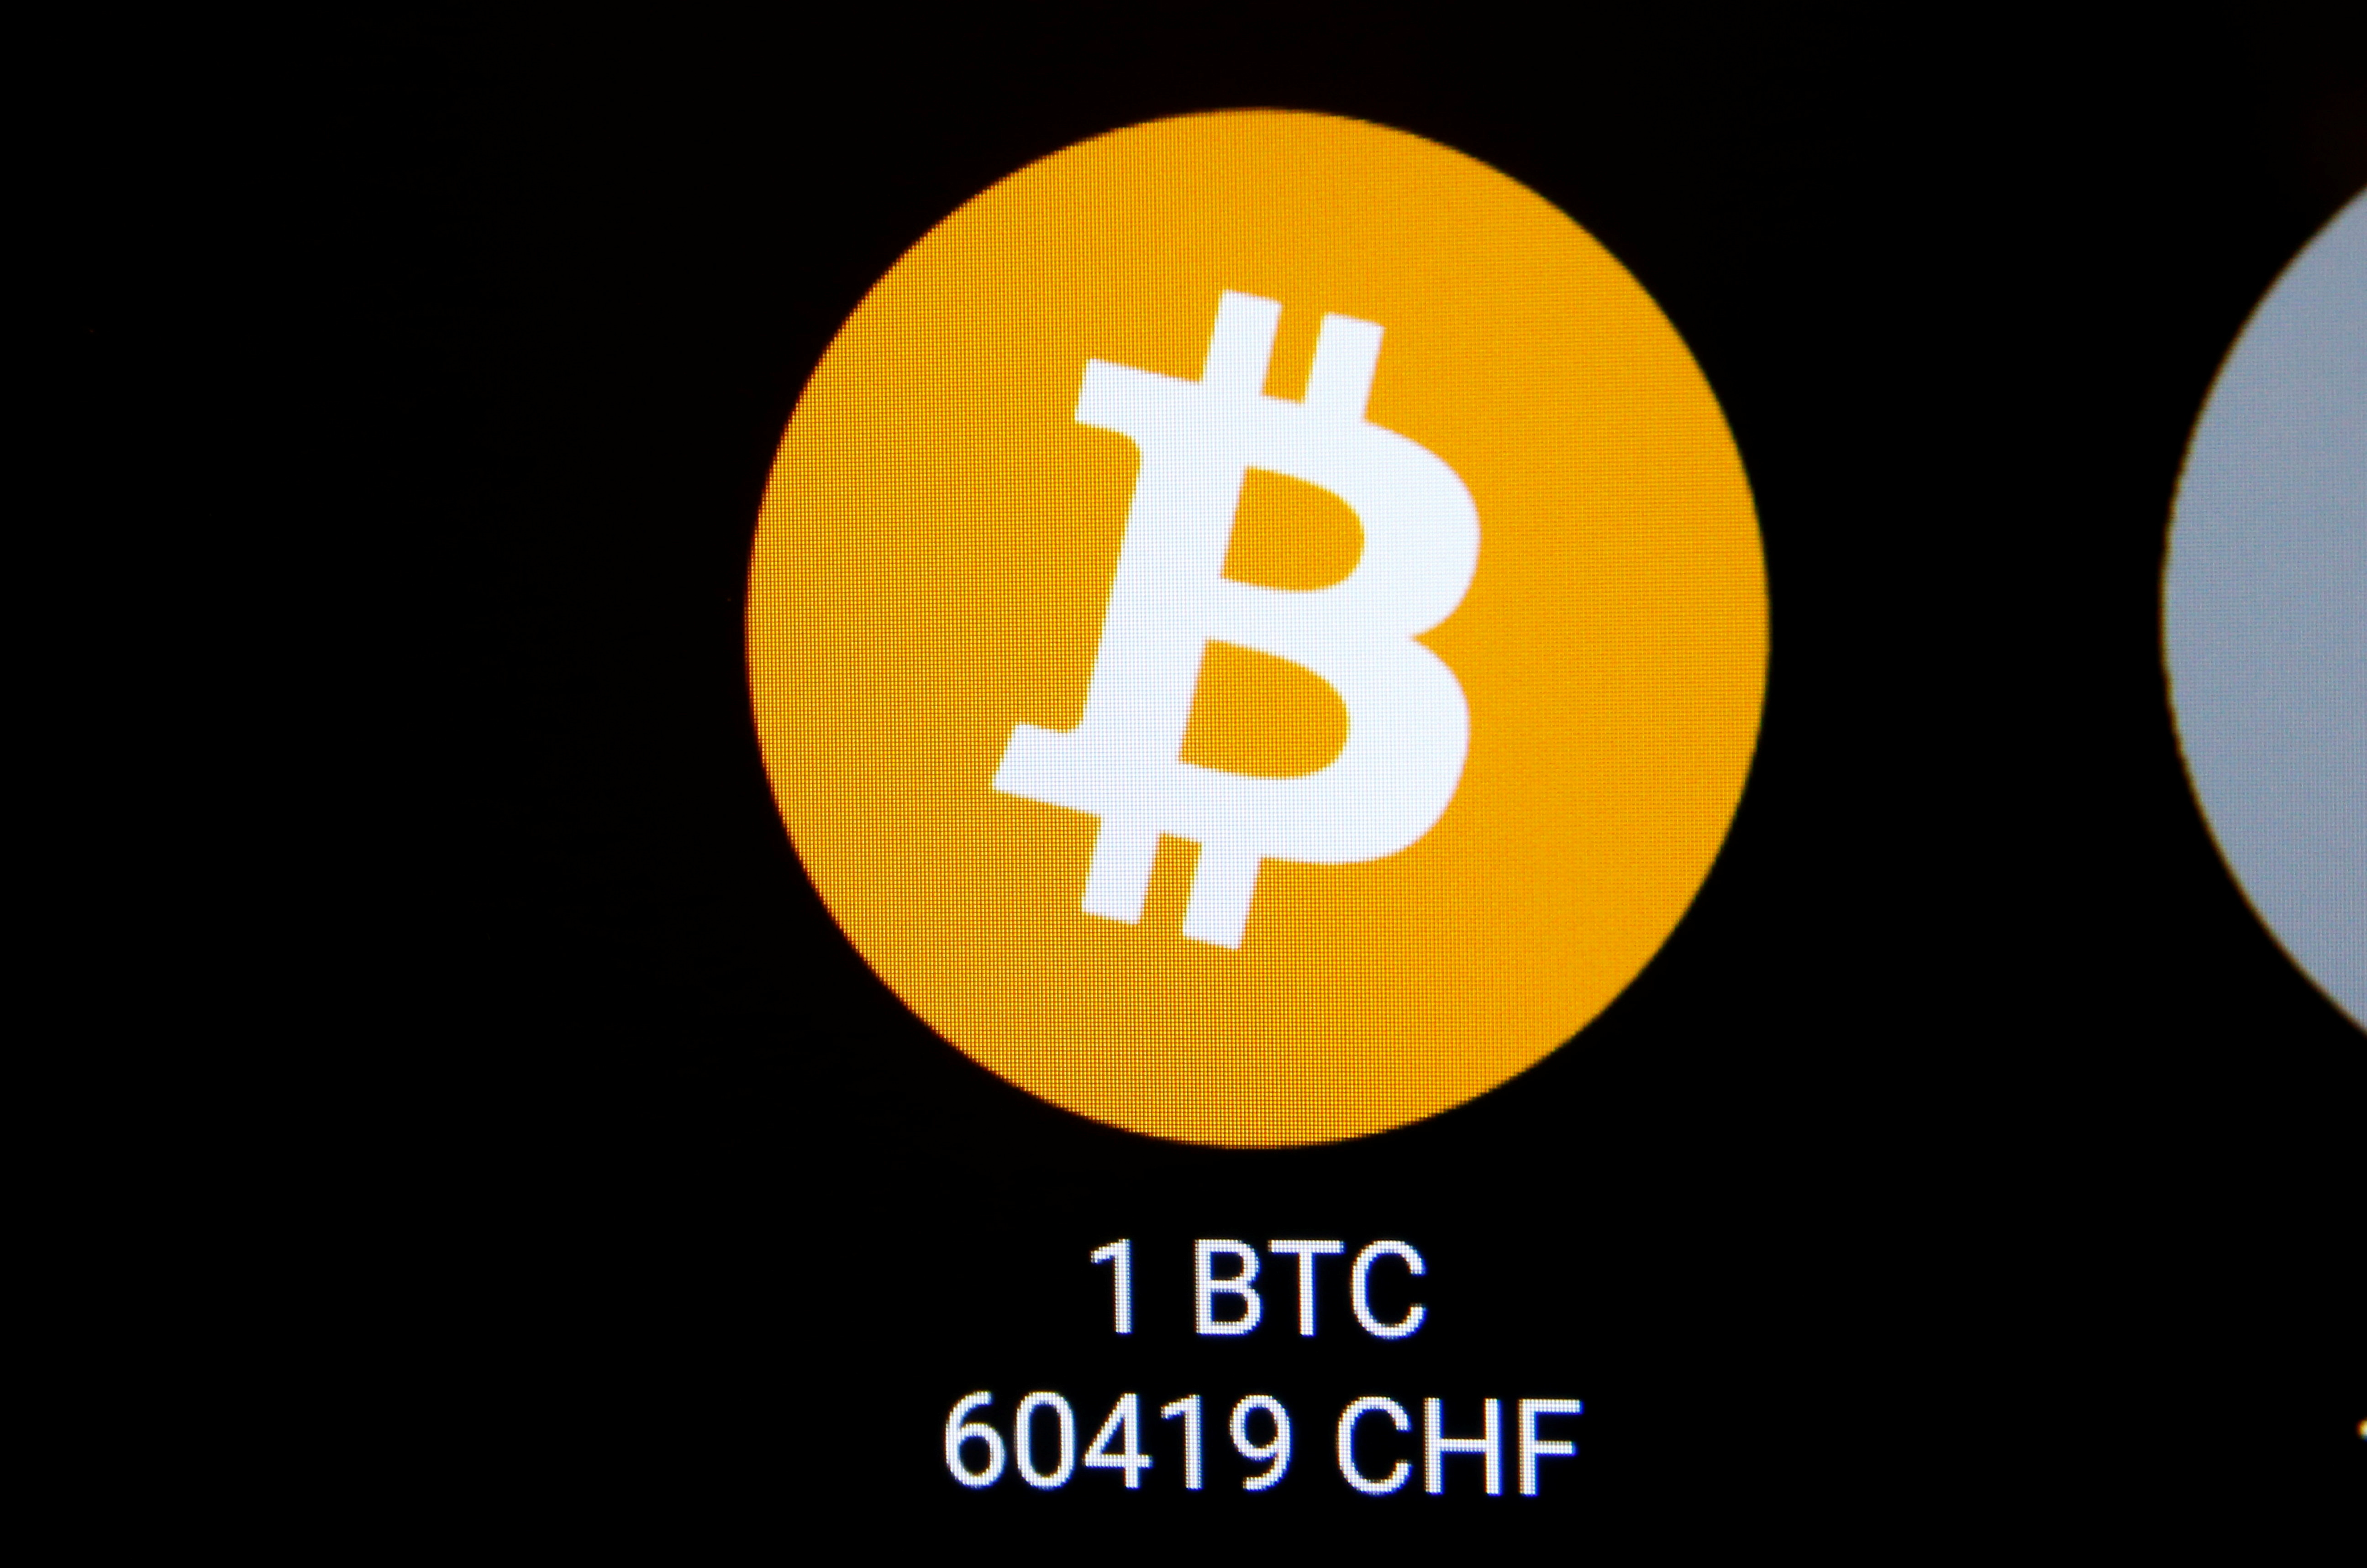 The logo and the exchange rate of Bitcoin (BTH) to Swiss franc (CHF) is seen on the display of a cryptocurrency ATM of blockchain payment service provider Bity at the House of Satoshi bitcoin and blockchain shop in Zurich, Switzerland November 4, 2021. REUTERS/Arnd Wiegmann